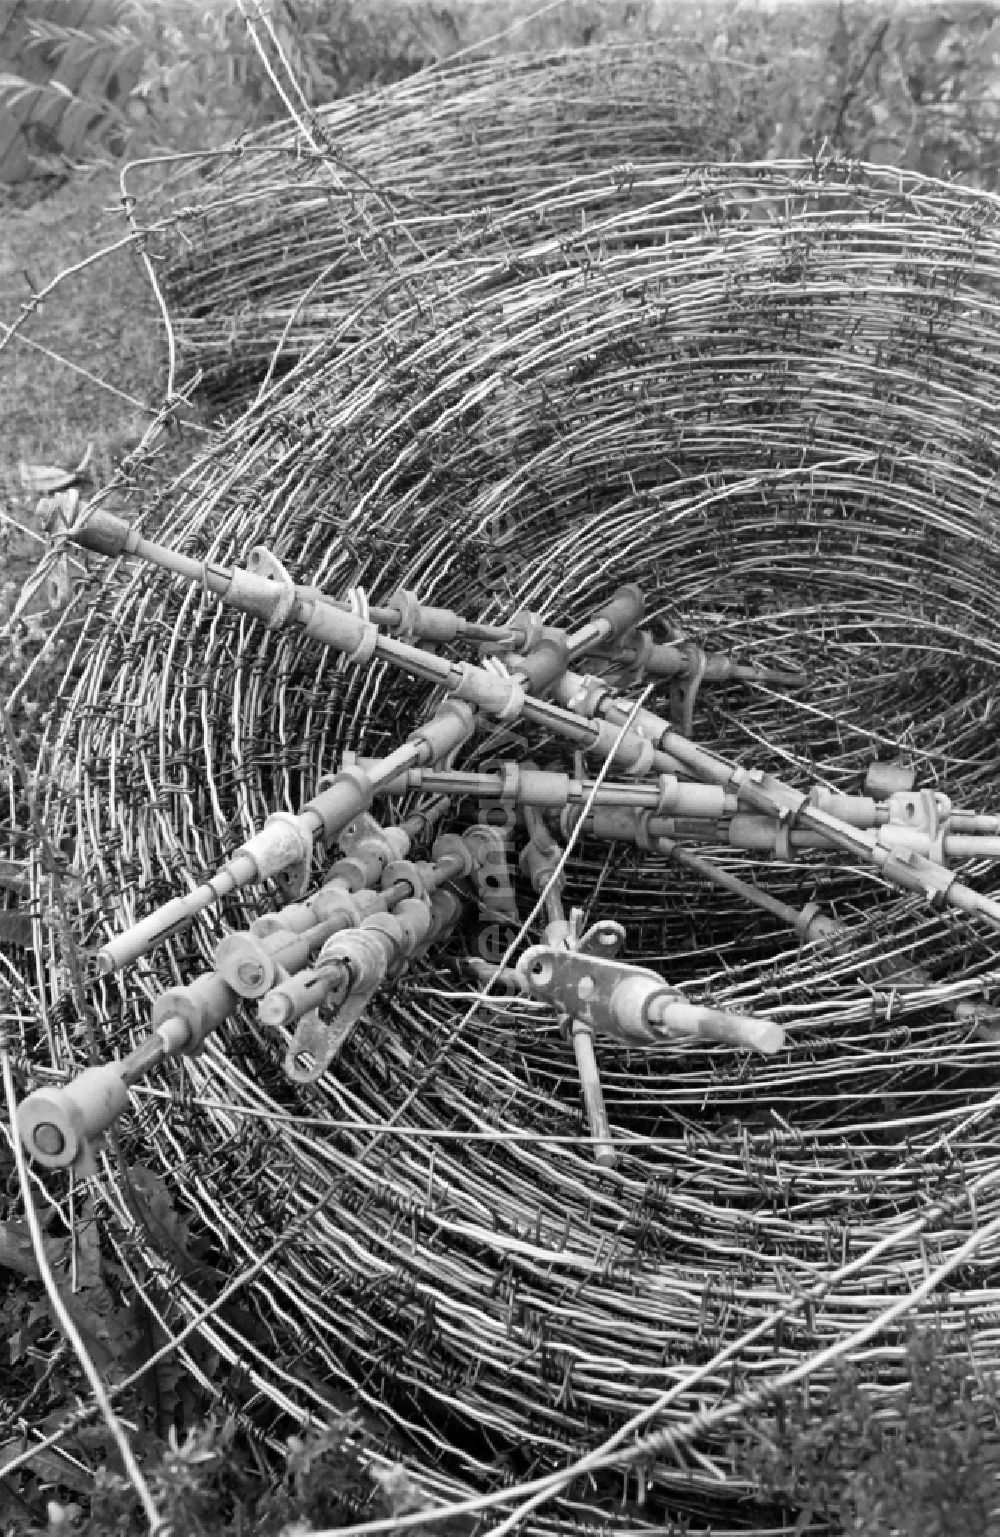 GDR image archive: Berlin - Barbed wire rolls of the barriers of the border fortifications and wall as well as security structures in the former blocking strip of the state border at a camp of the border troops in the Steinstuecken district in Berlin on the territory of the former GDR, German Democratic Republic